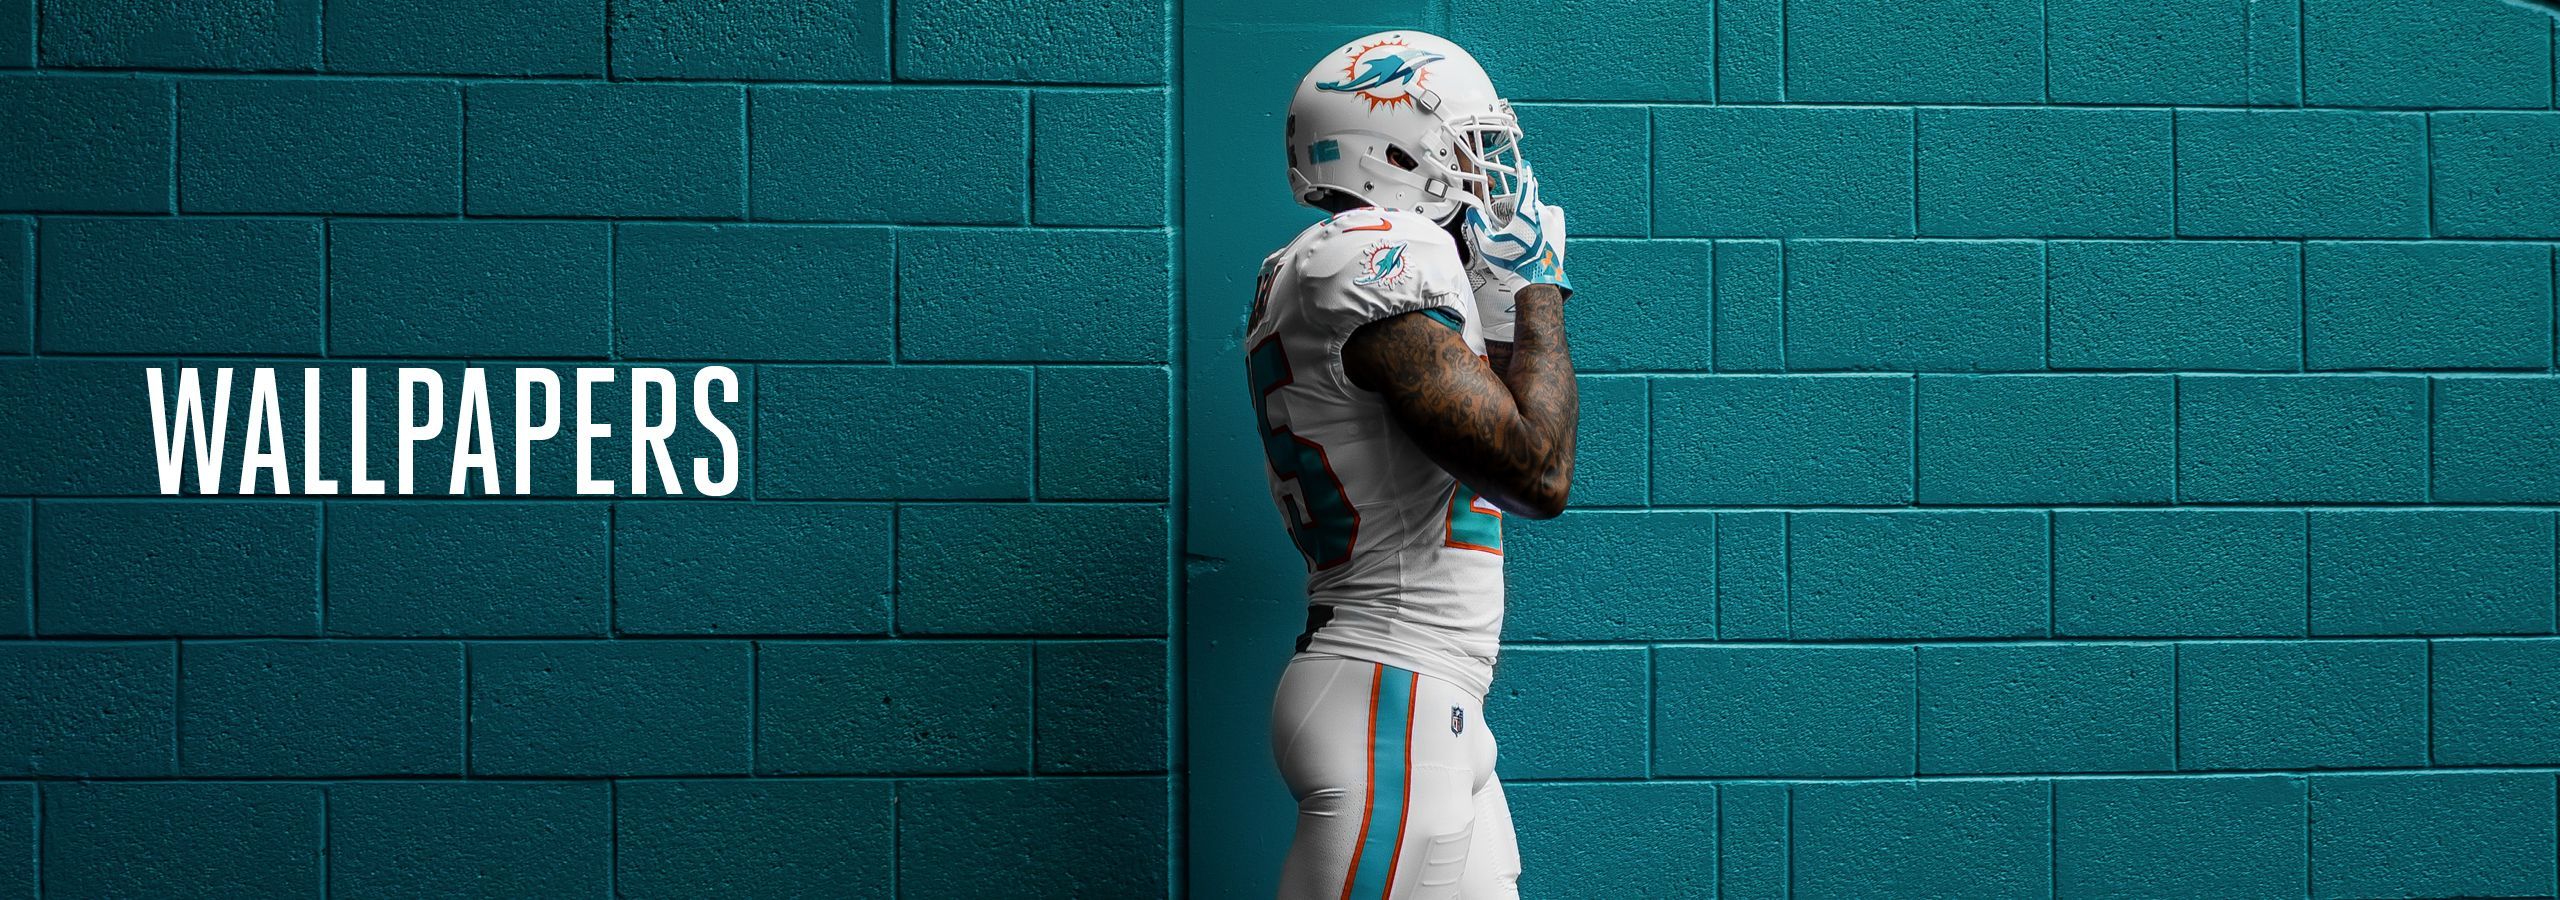 Dolphins Wallpaper. Miami Dolphins .miamidolphins.com